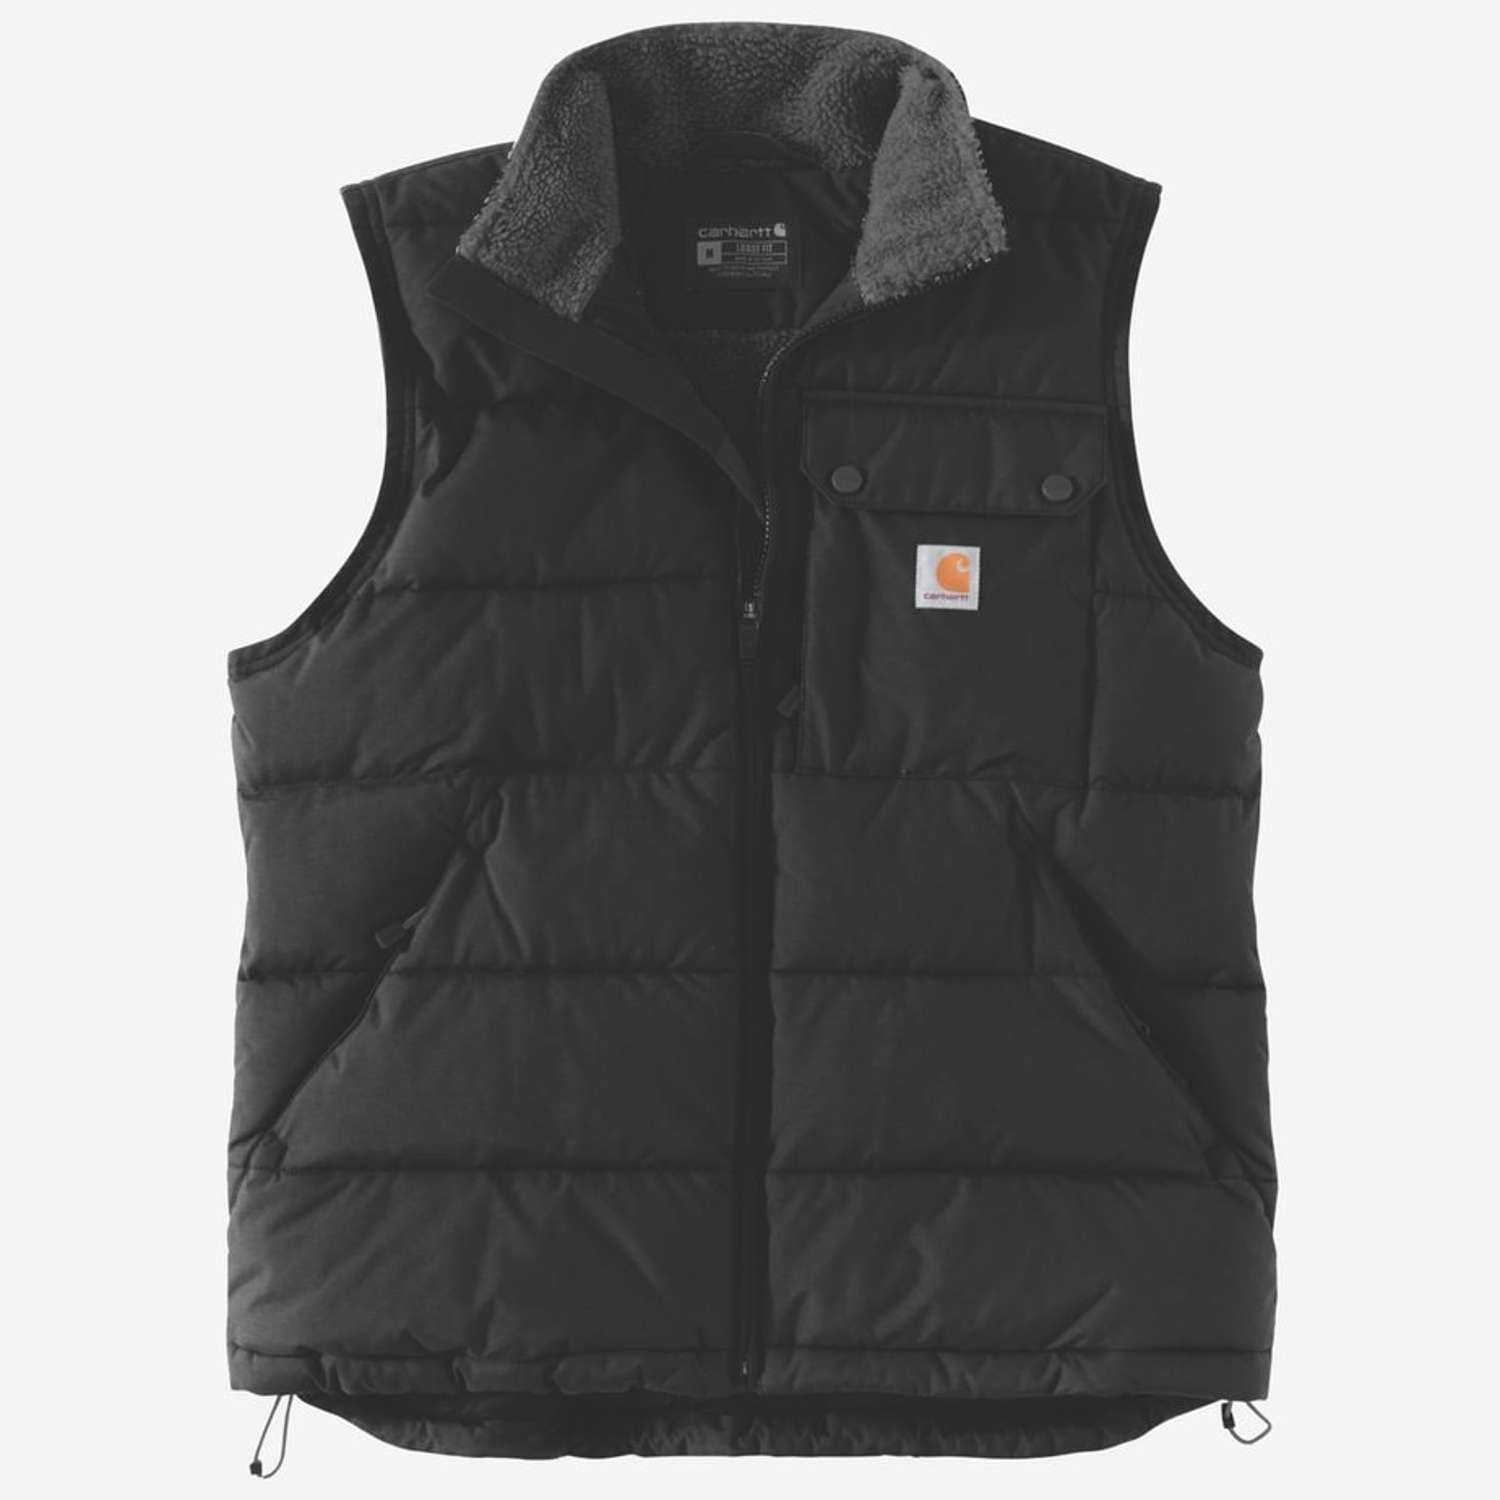 Se CARHARTT Loose Fit Midweight Insulated Vest BLACK - XXL hos Toolster.dk